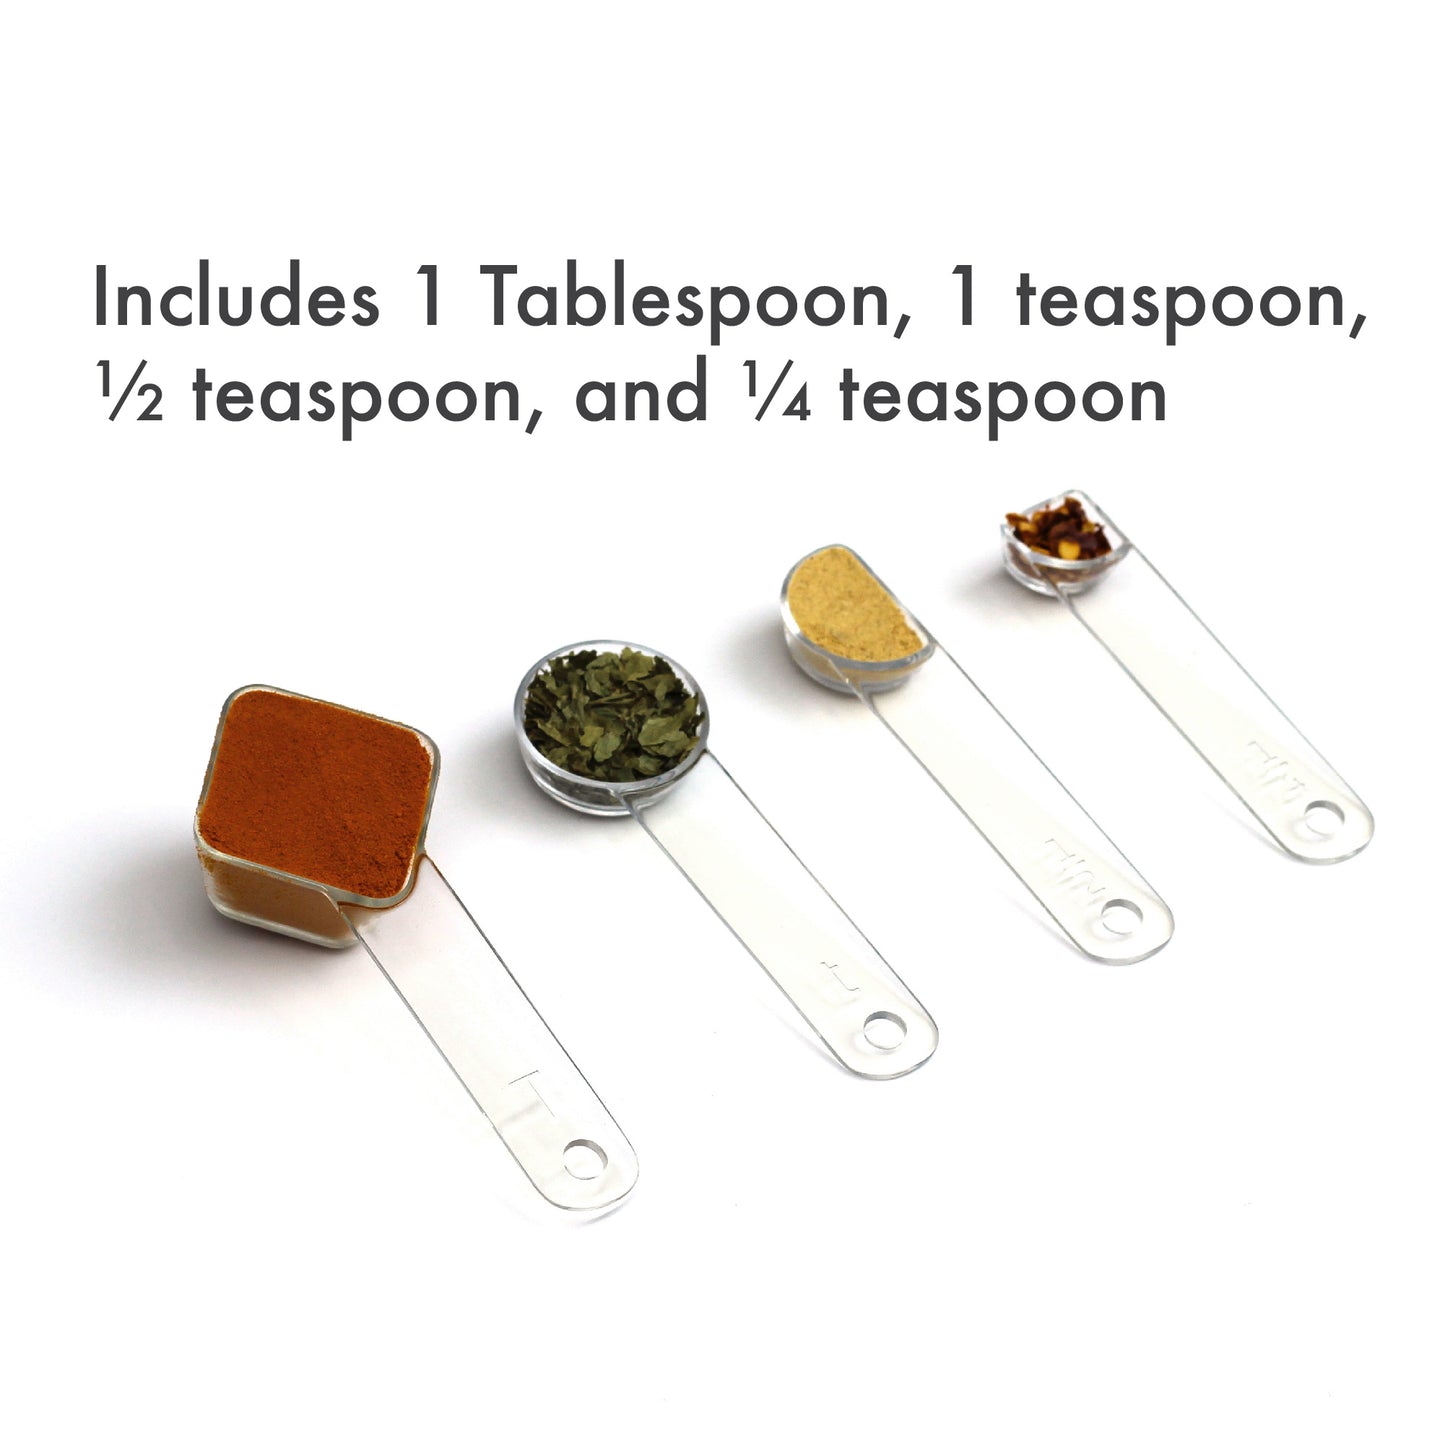 visual measuring spoons arrayed on an angle and filled with colorful spices. Caption say includes 1 tablespoon, 1 teaspoon, half teaspoon, and quarter teaspoon